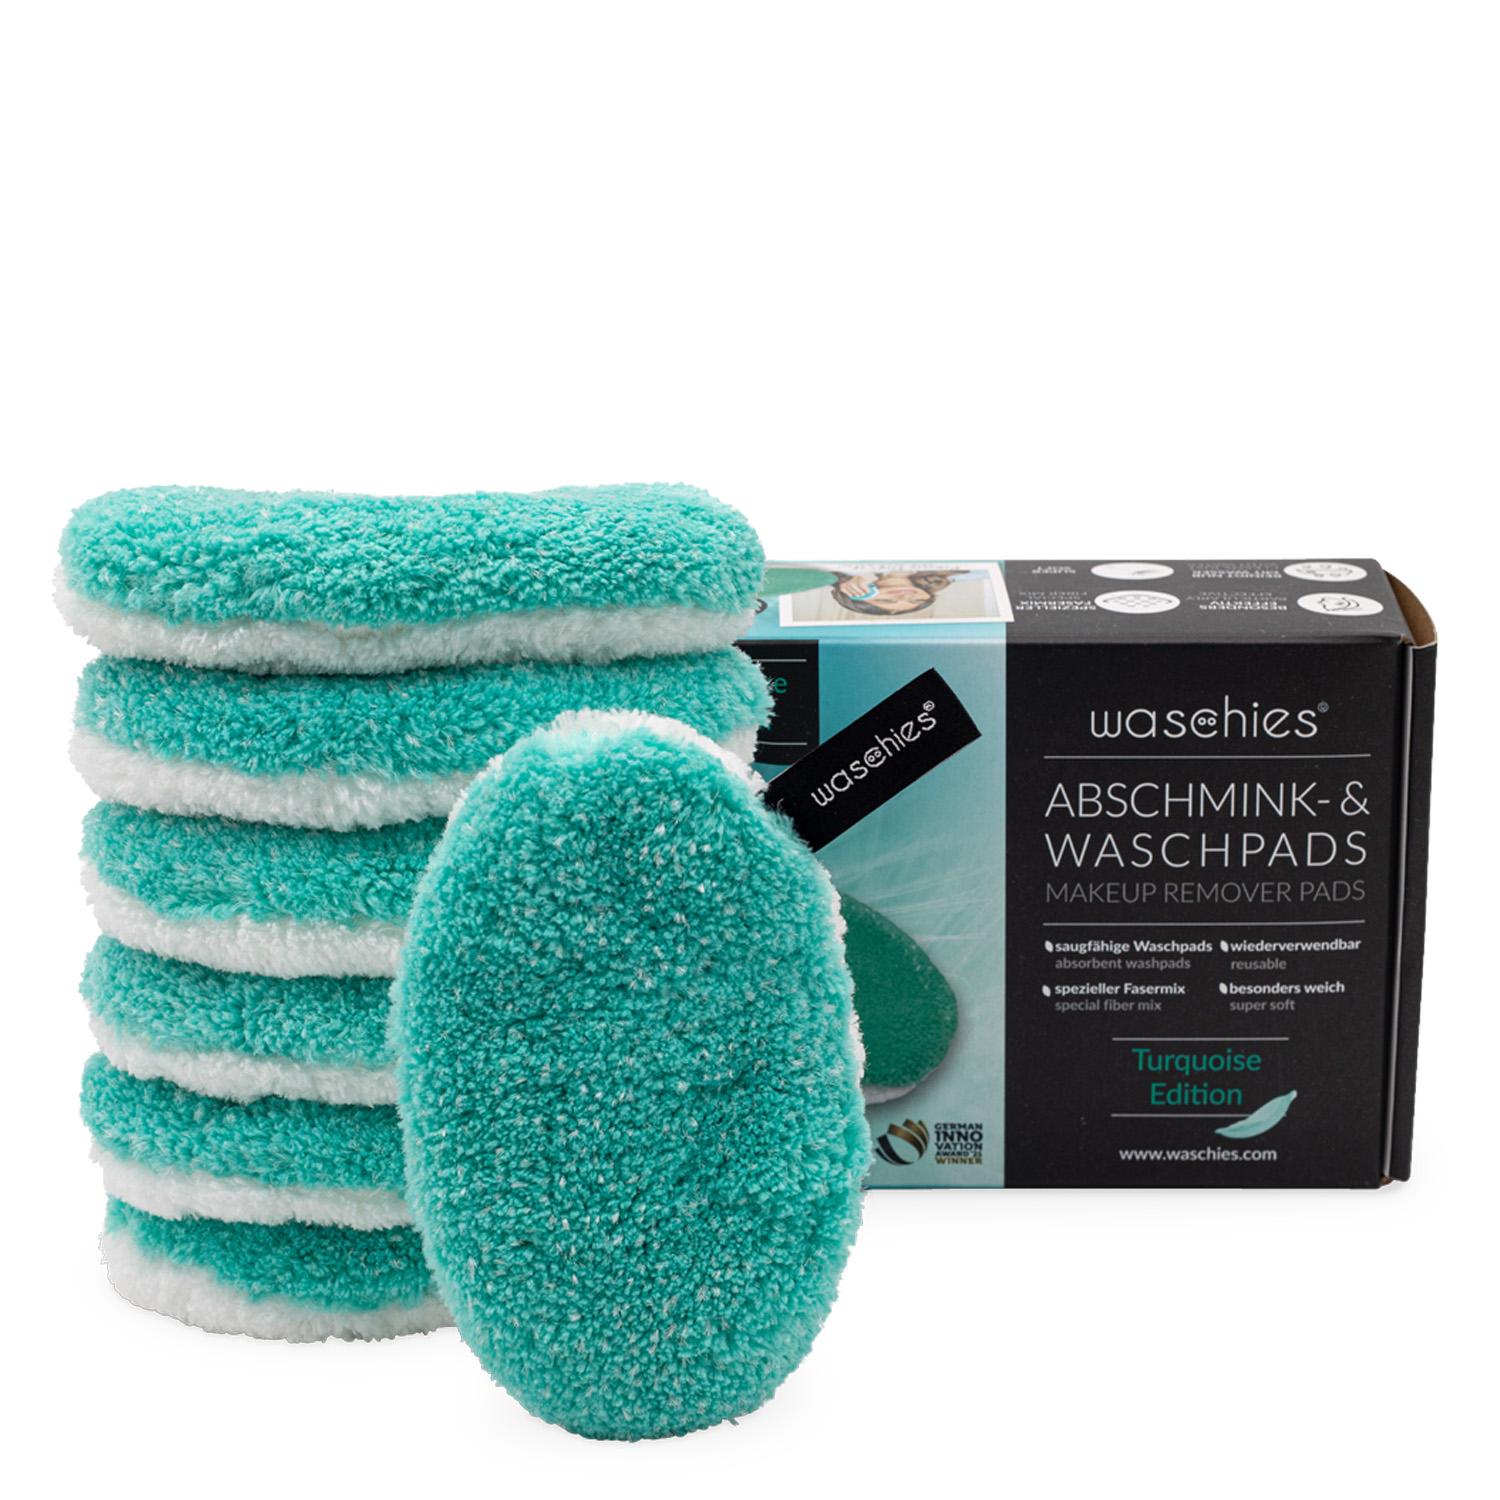 Waschies Faceline - Abschminkpads & Waschpads Turquoise-Edition